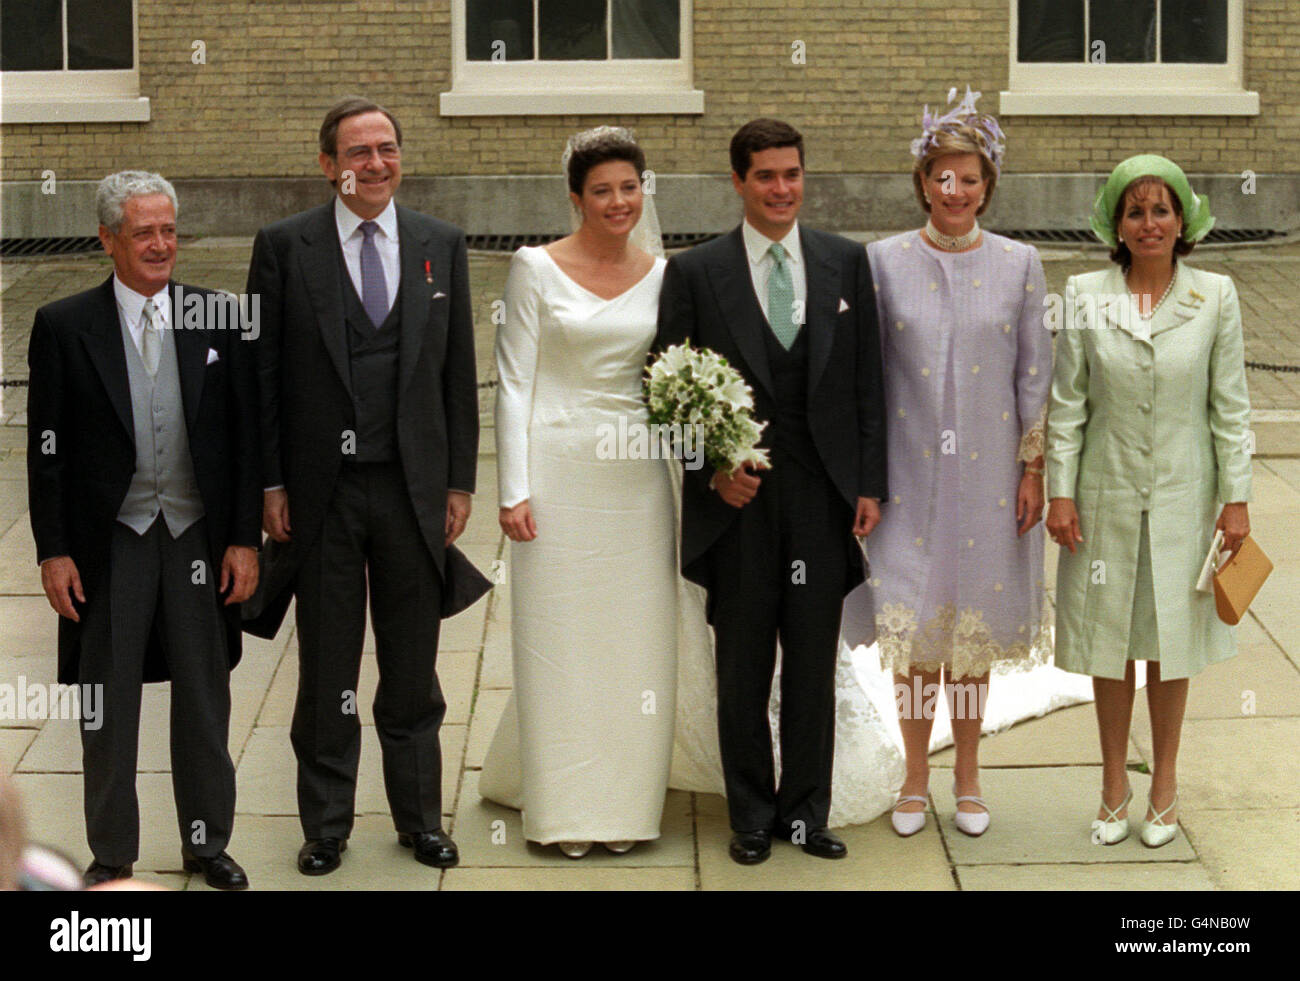 The wedding party at the Kenwood House reception following the wedding of Princess Alexia to Carlos Morales Quintana. [L-R] Luis Miguel Morales, King Constantine, Princess Alexia, Carlos Morales Quintana, Queen Anne Marie and Mrs Maria Teresa Quintana. Stock Photo